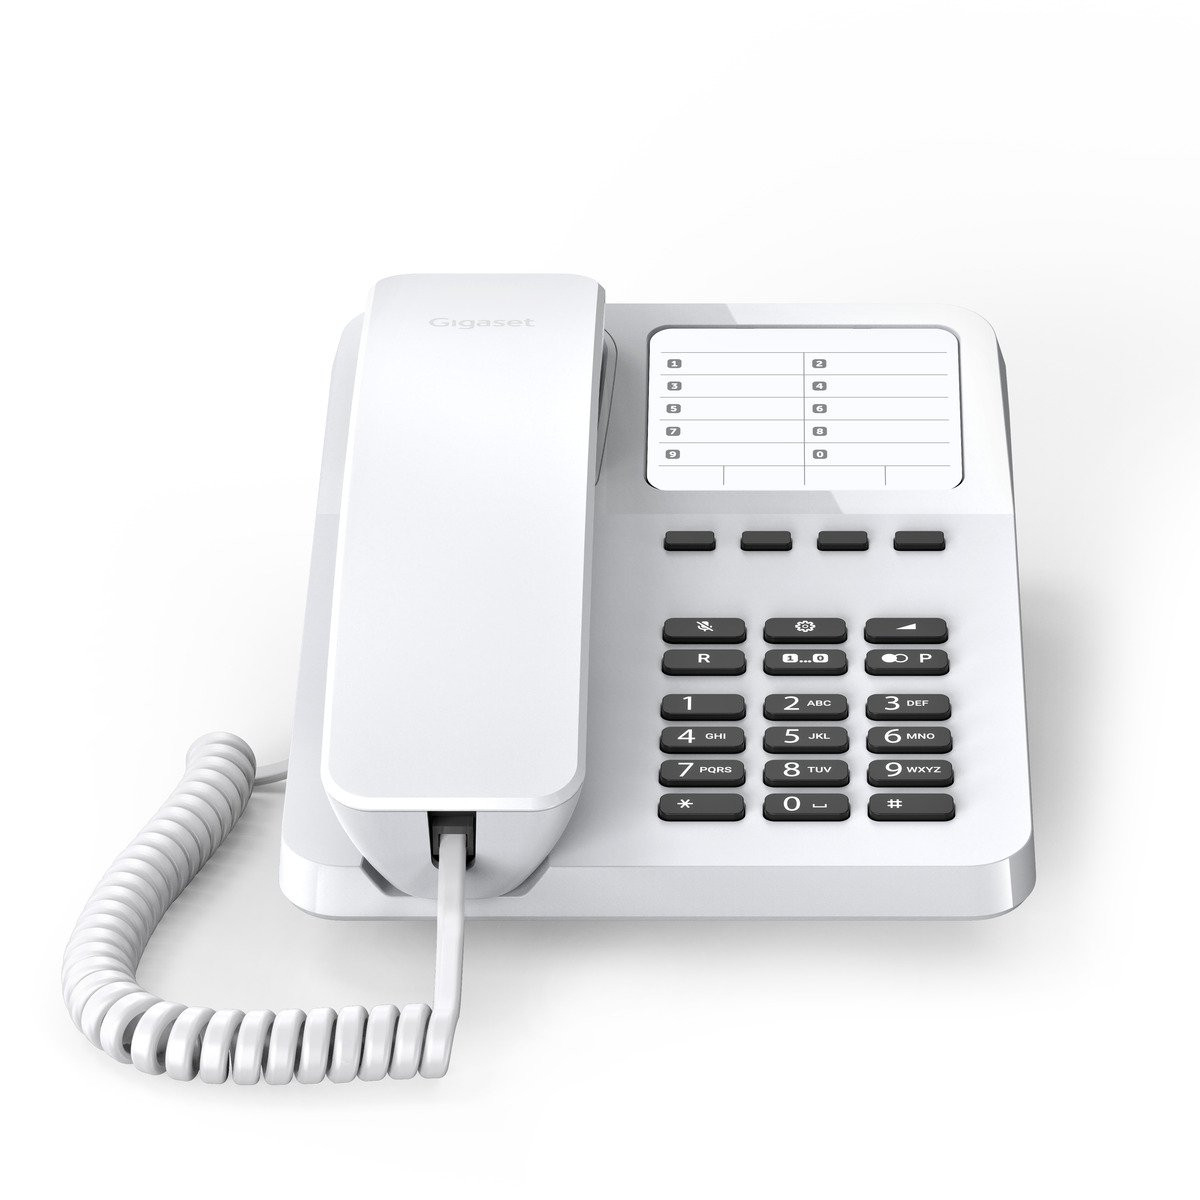 S30054-H6538-B102 UNIFY GIGASET OPENSTAGE DESK 400 - Analog telephone - Wired handset - 10 entries - White